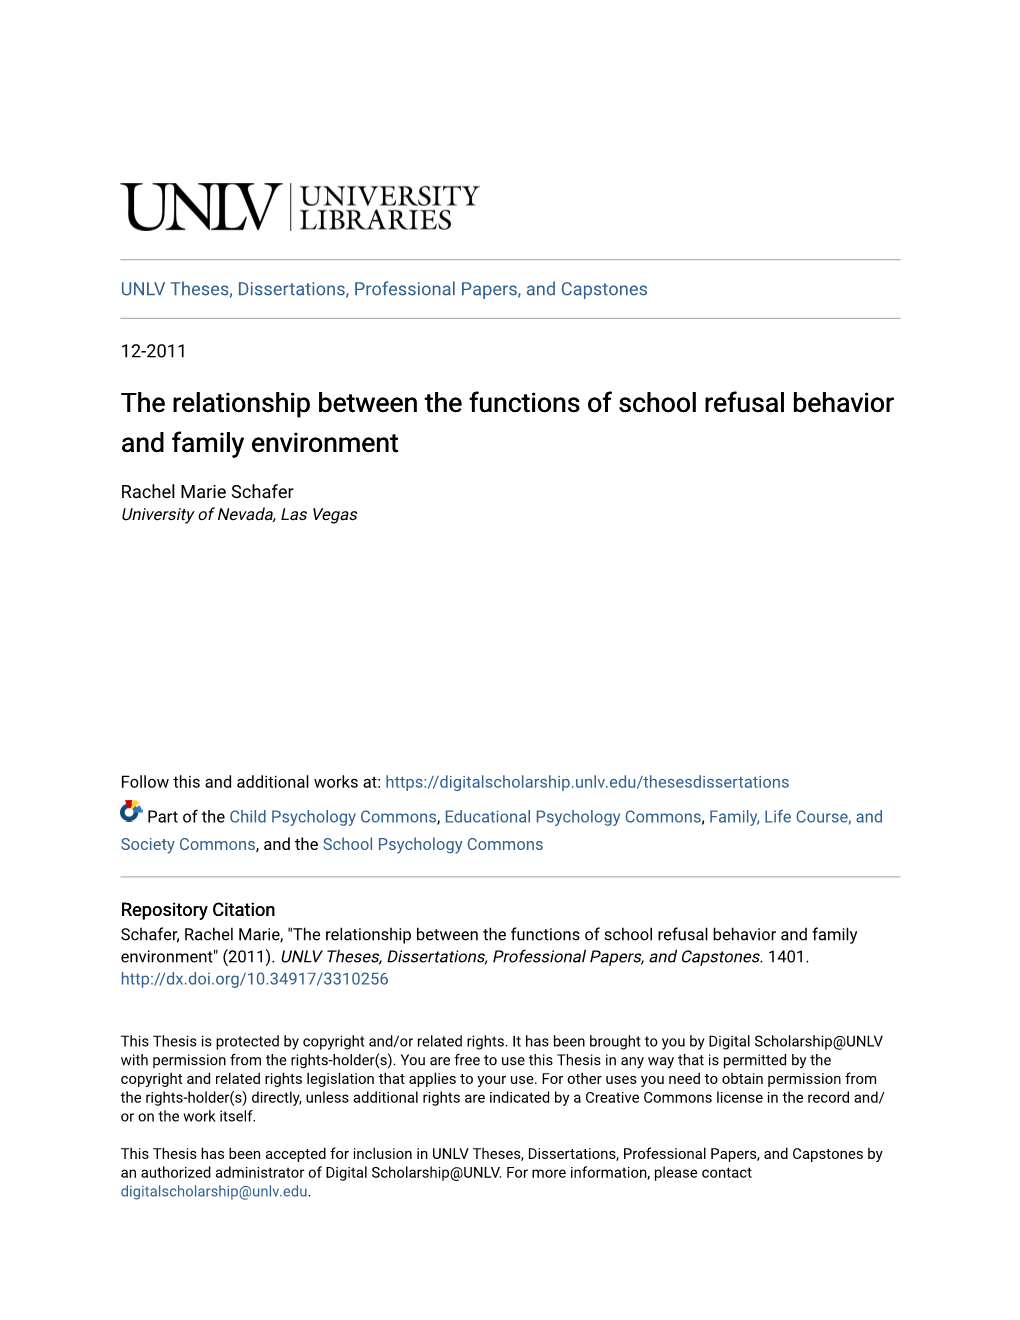 The Relationship Between the Functions of School Refusal Behavior and Family Environment